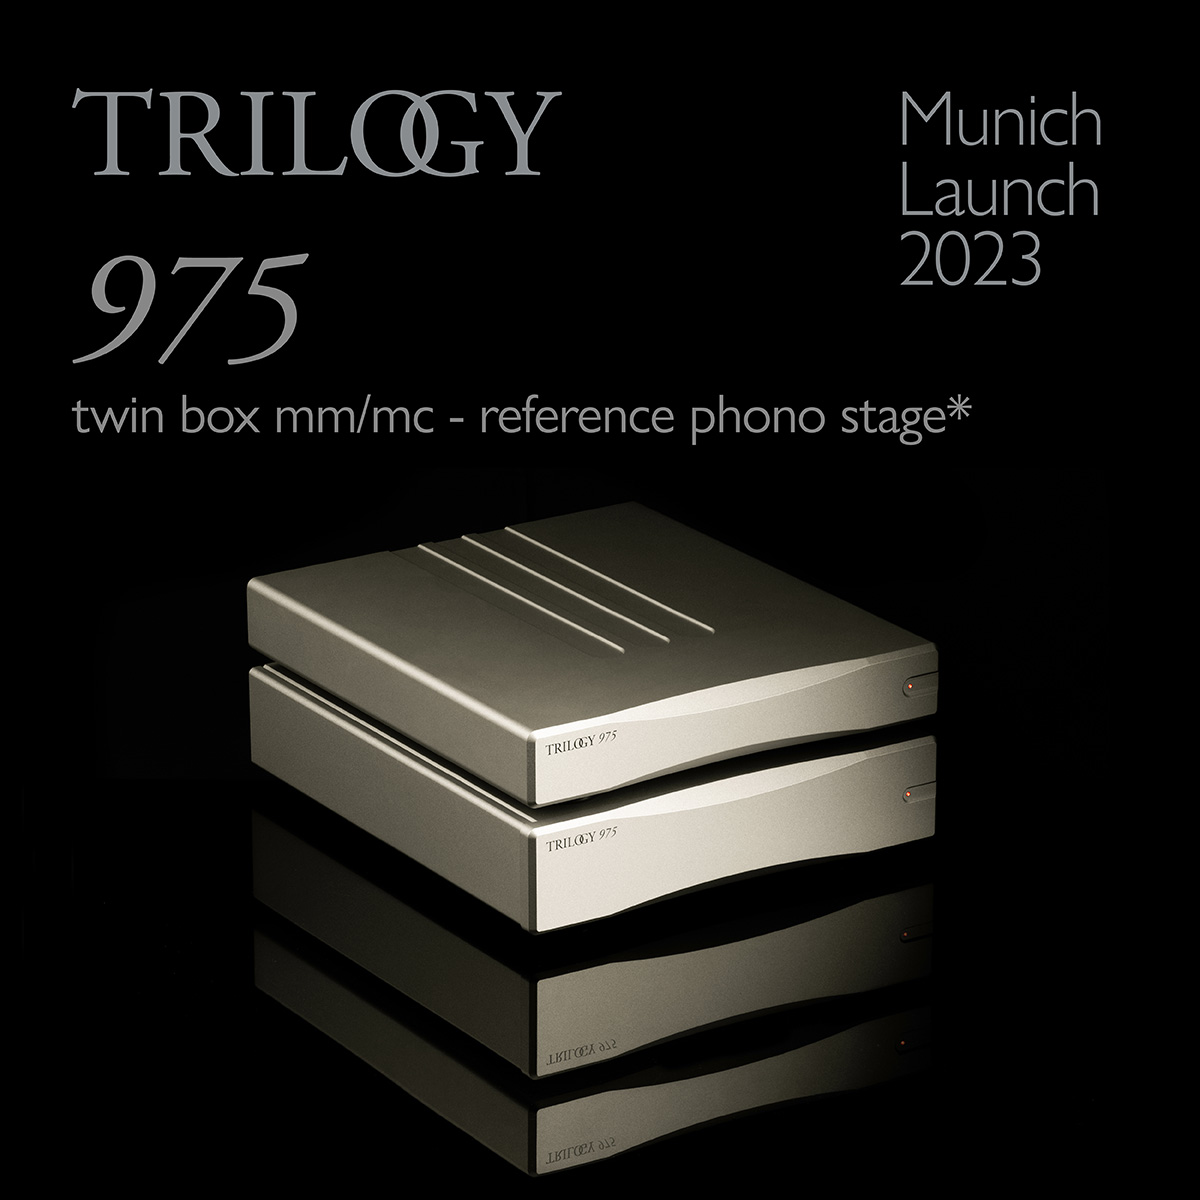 New product launch. Our 975 - a two box meticulously engineered reference phono stage. Do come and see us. We look forward to seeing you.
We're at A 4.2, F224. MAY 18 TO 21, 2023  *Shipping Autumn 2023. #audiophile #highendhifi #munichhighend2023 #madeinbritain